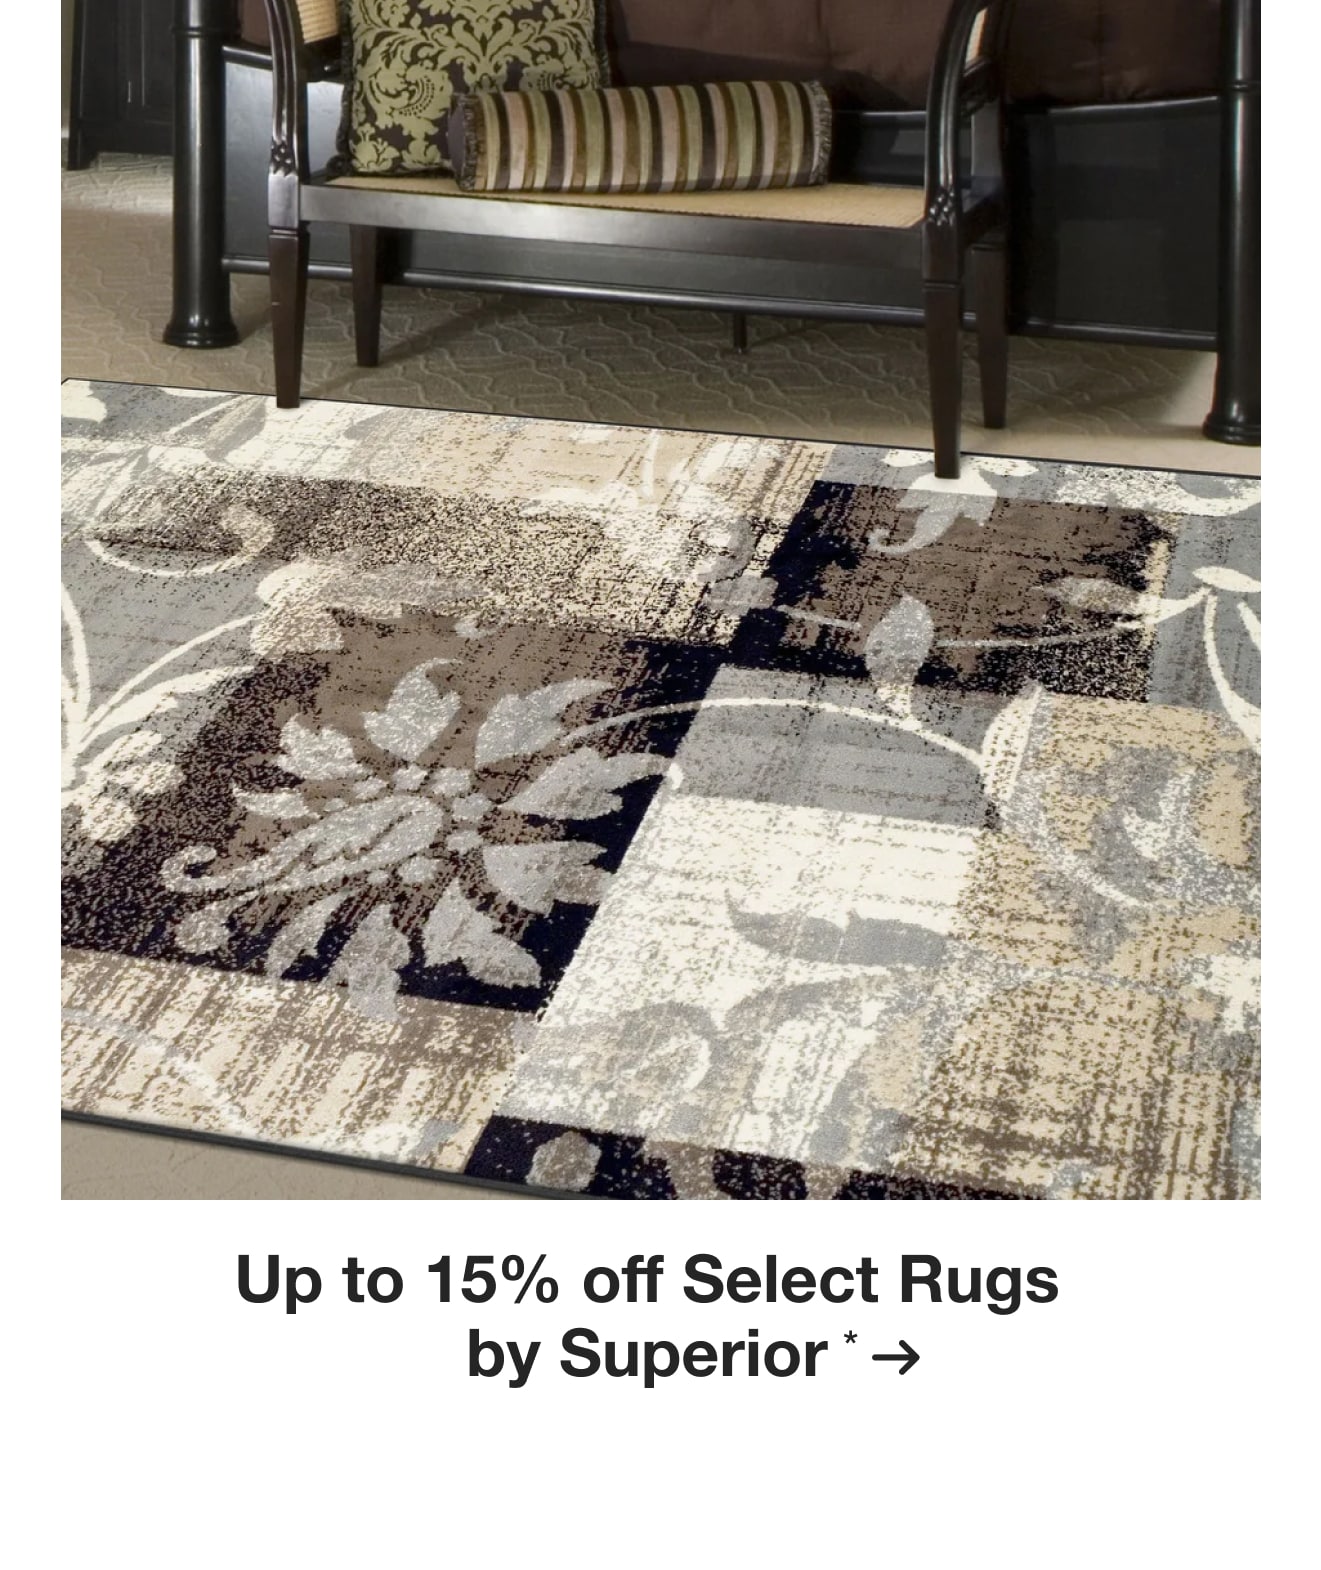 Up to 15% off Select Rugs by Superior*